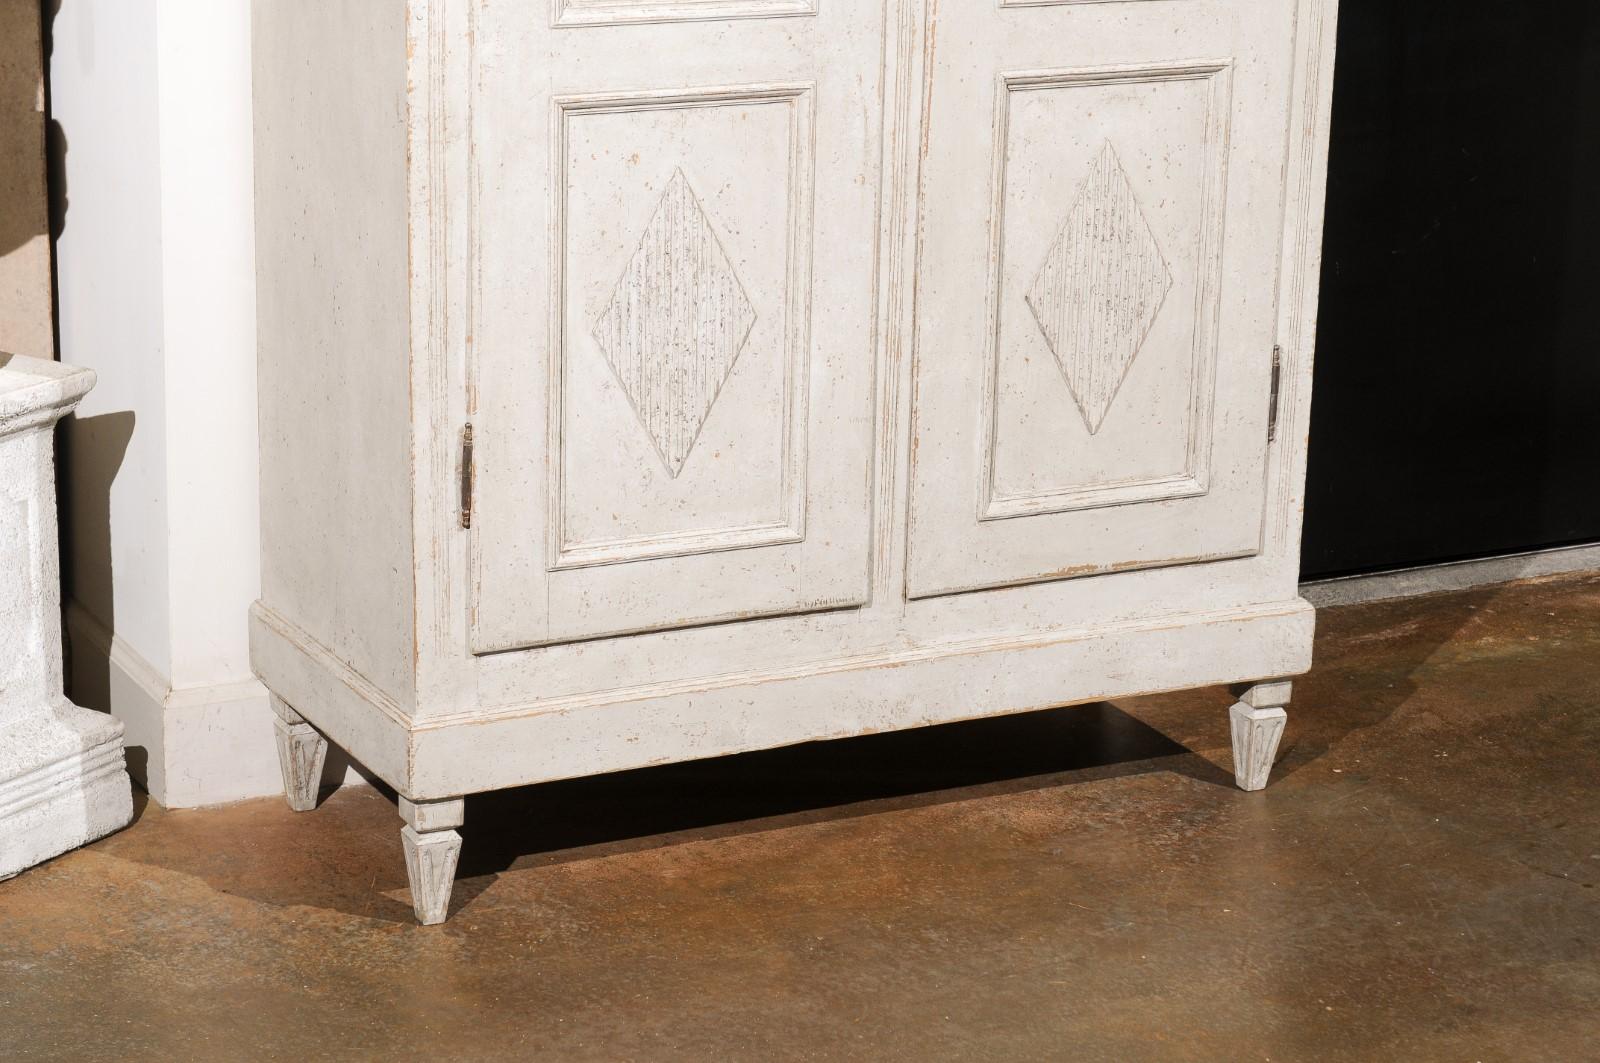 19th Century Swedish Gustavian Style 1880s Painted Linen Cabinet with Carved Diamond Motifs